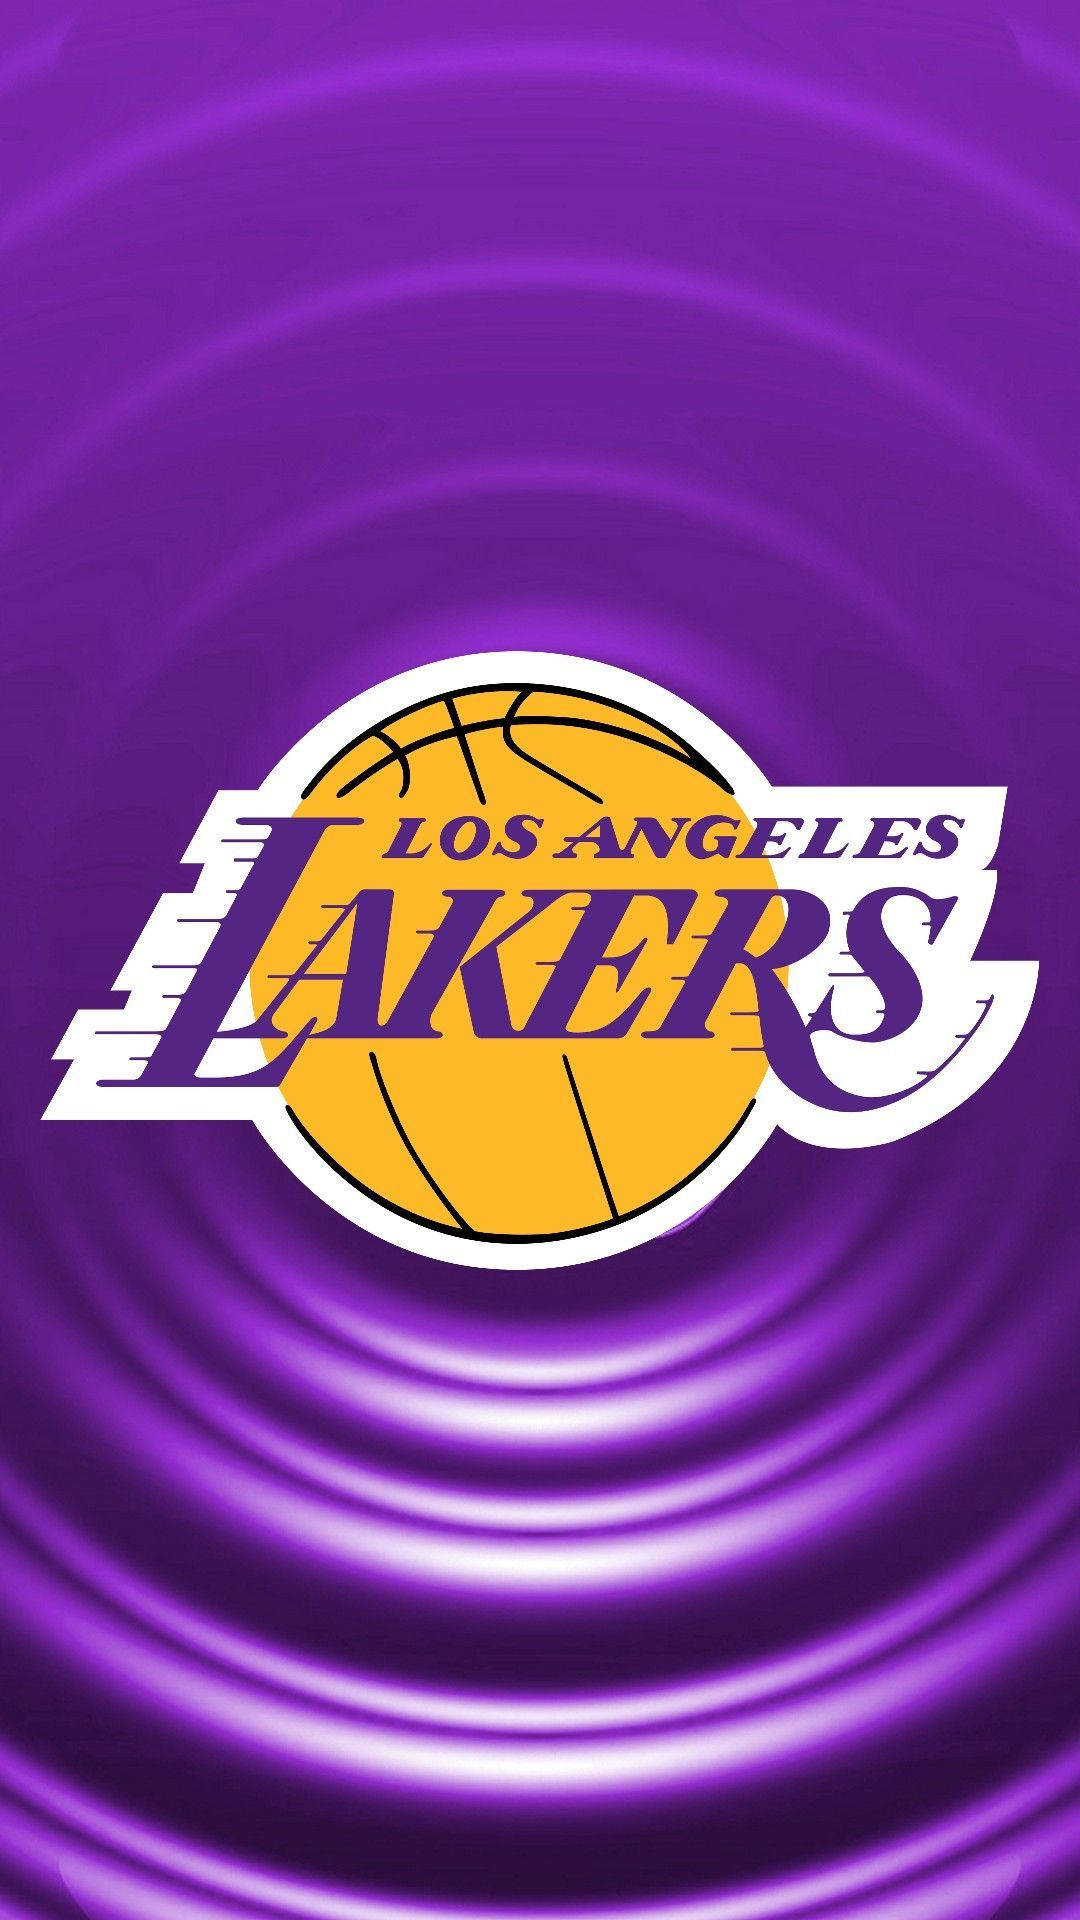 Lakers Iphone With Purple Ripples Wallpaper